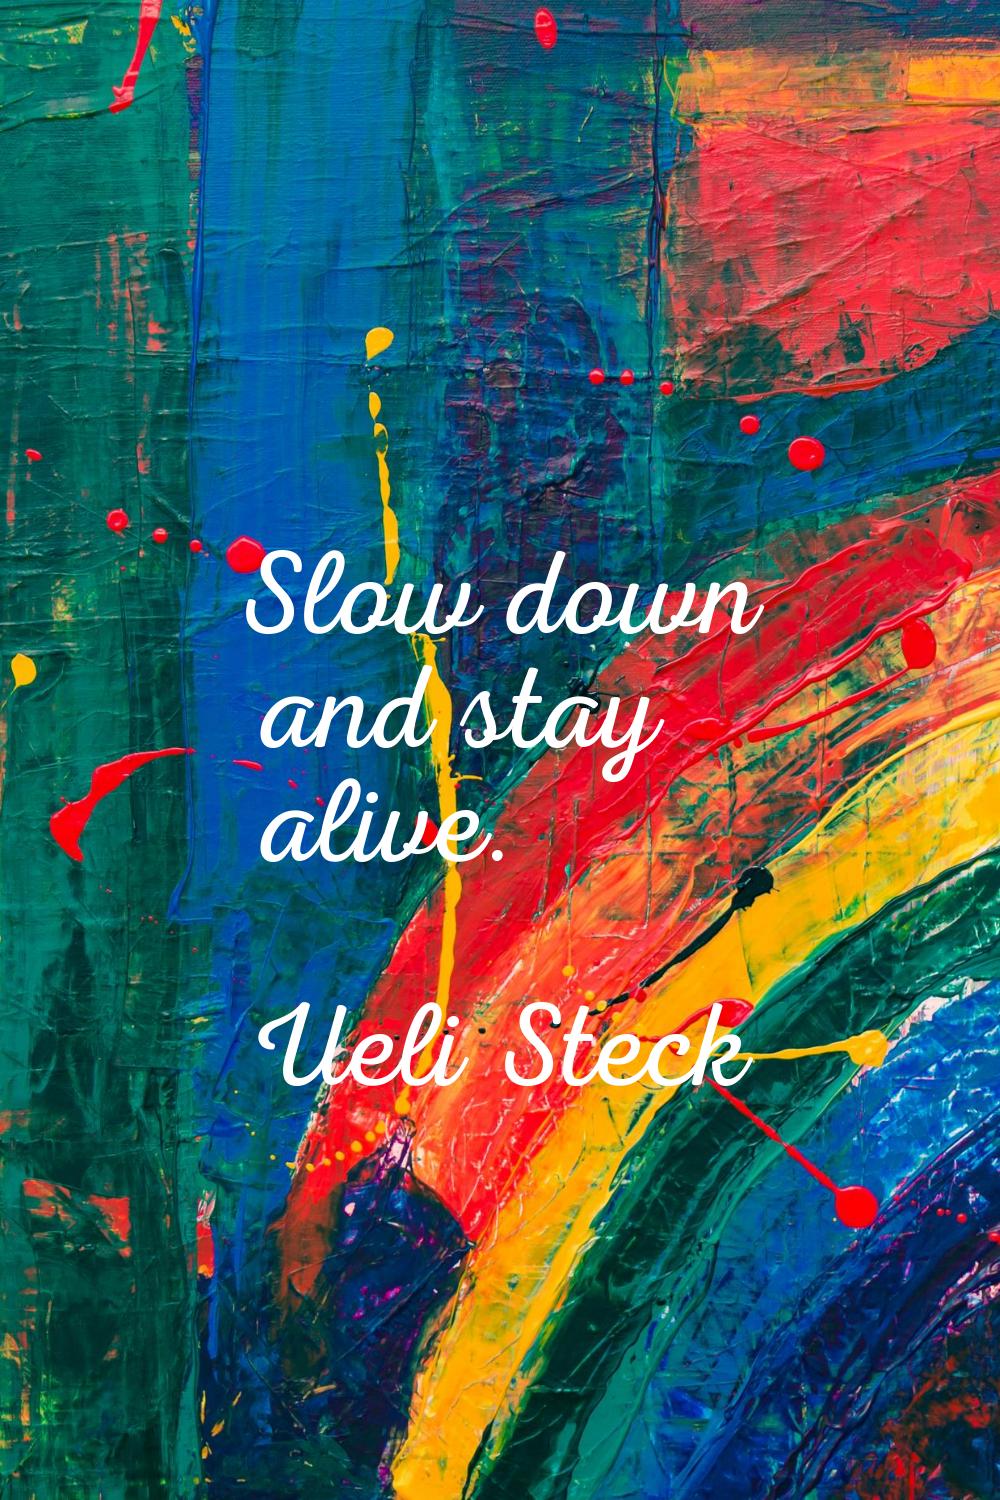 Slow down and stay alive.